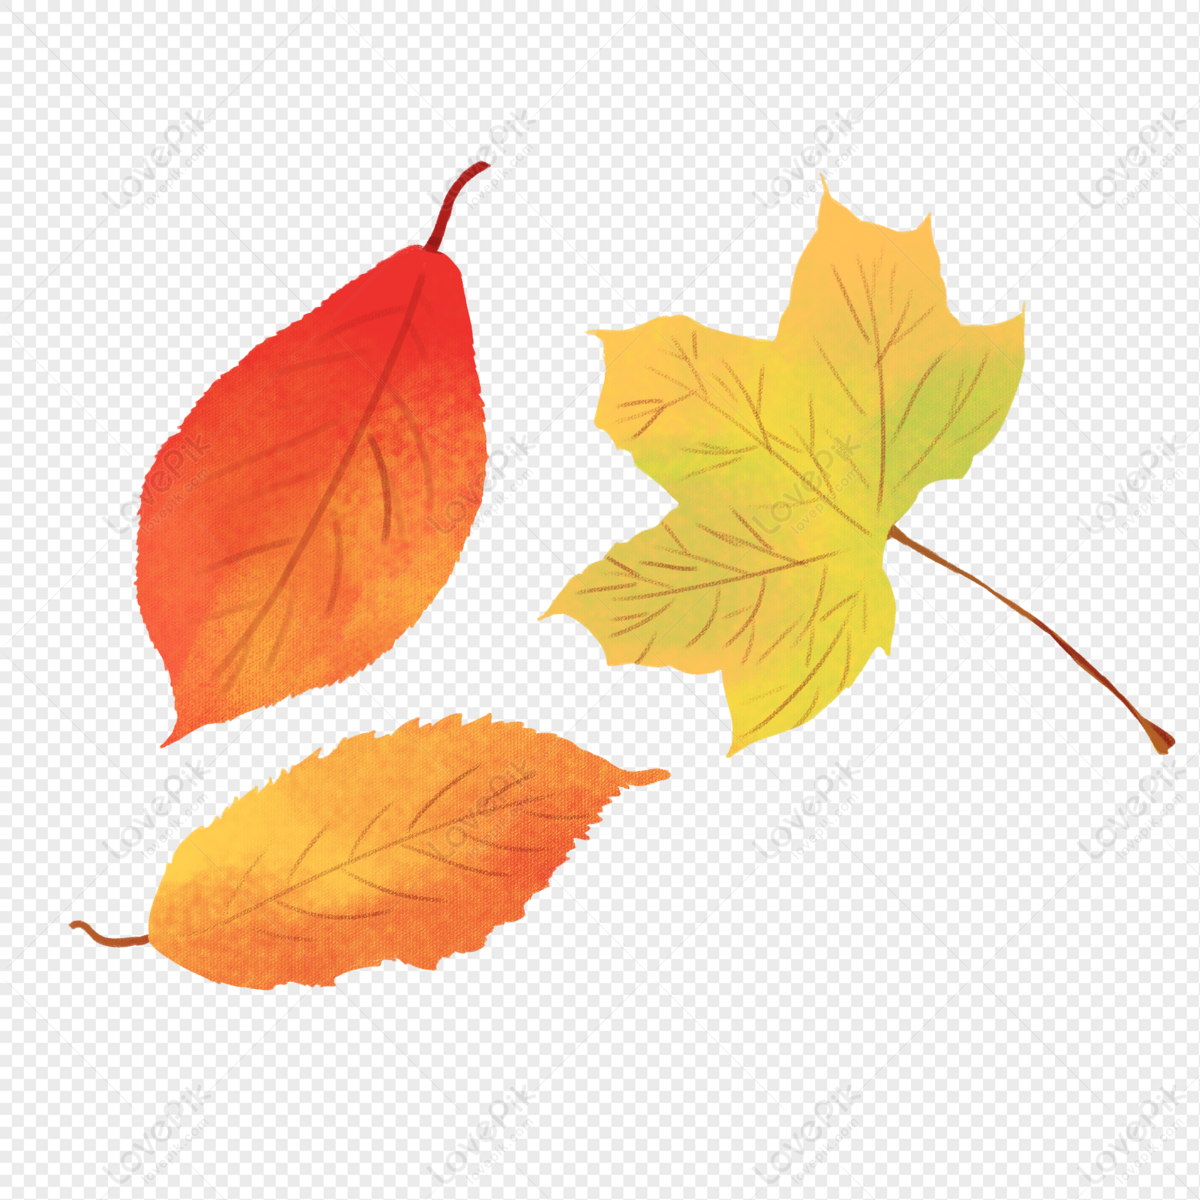 The smARTteacher Resource: 5th Grade - Fall Leaves